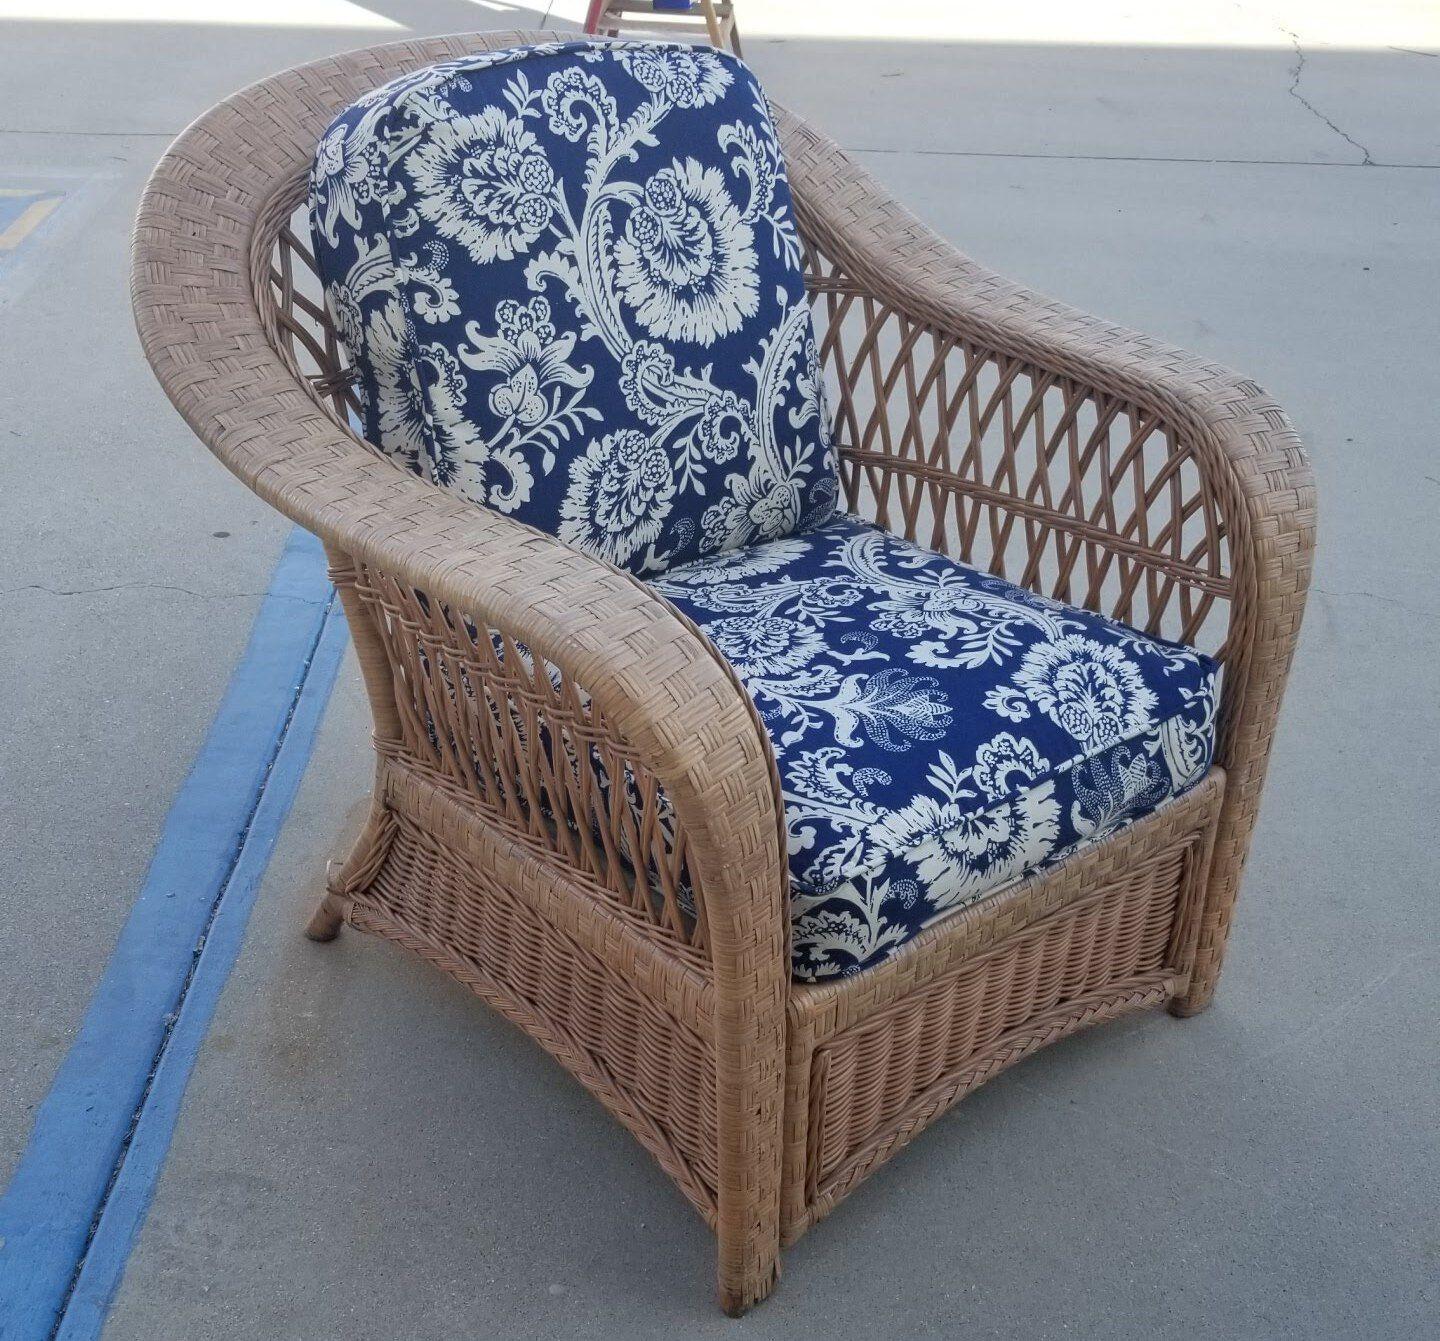 Restored Rattan Wicker Lounge Chair In Excellent Condition For Sale In Van Nuys, CA